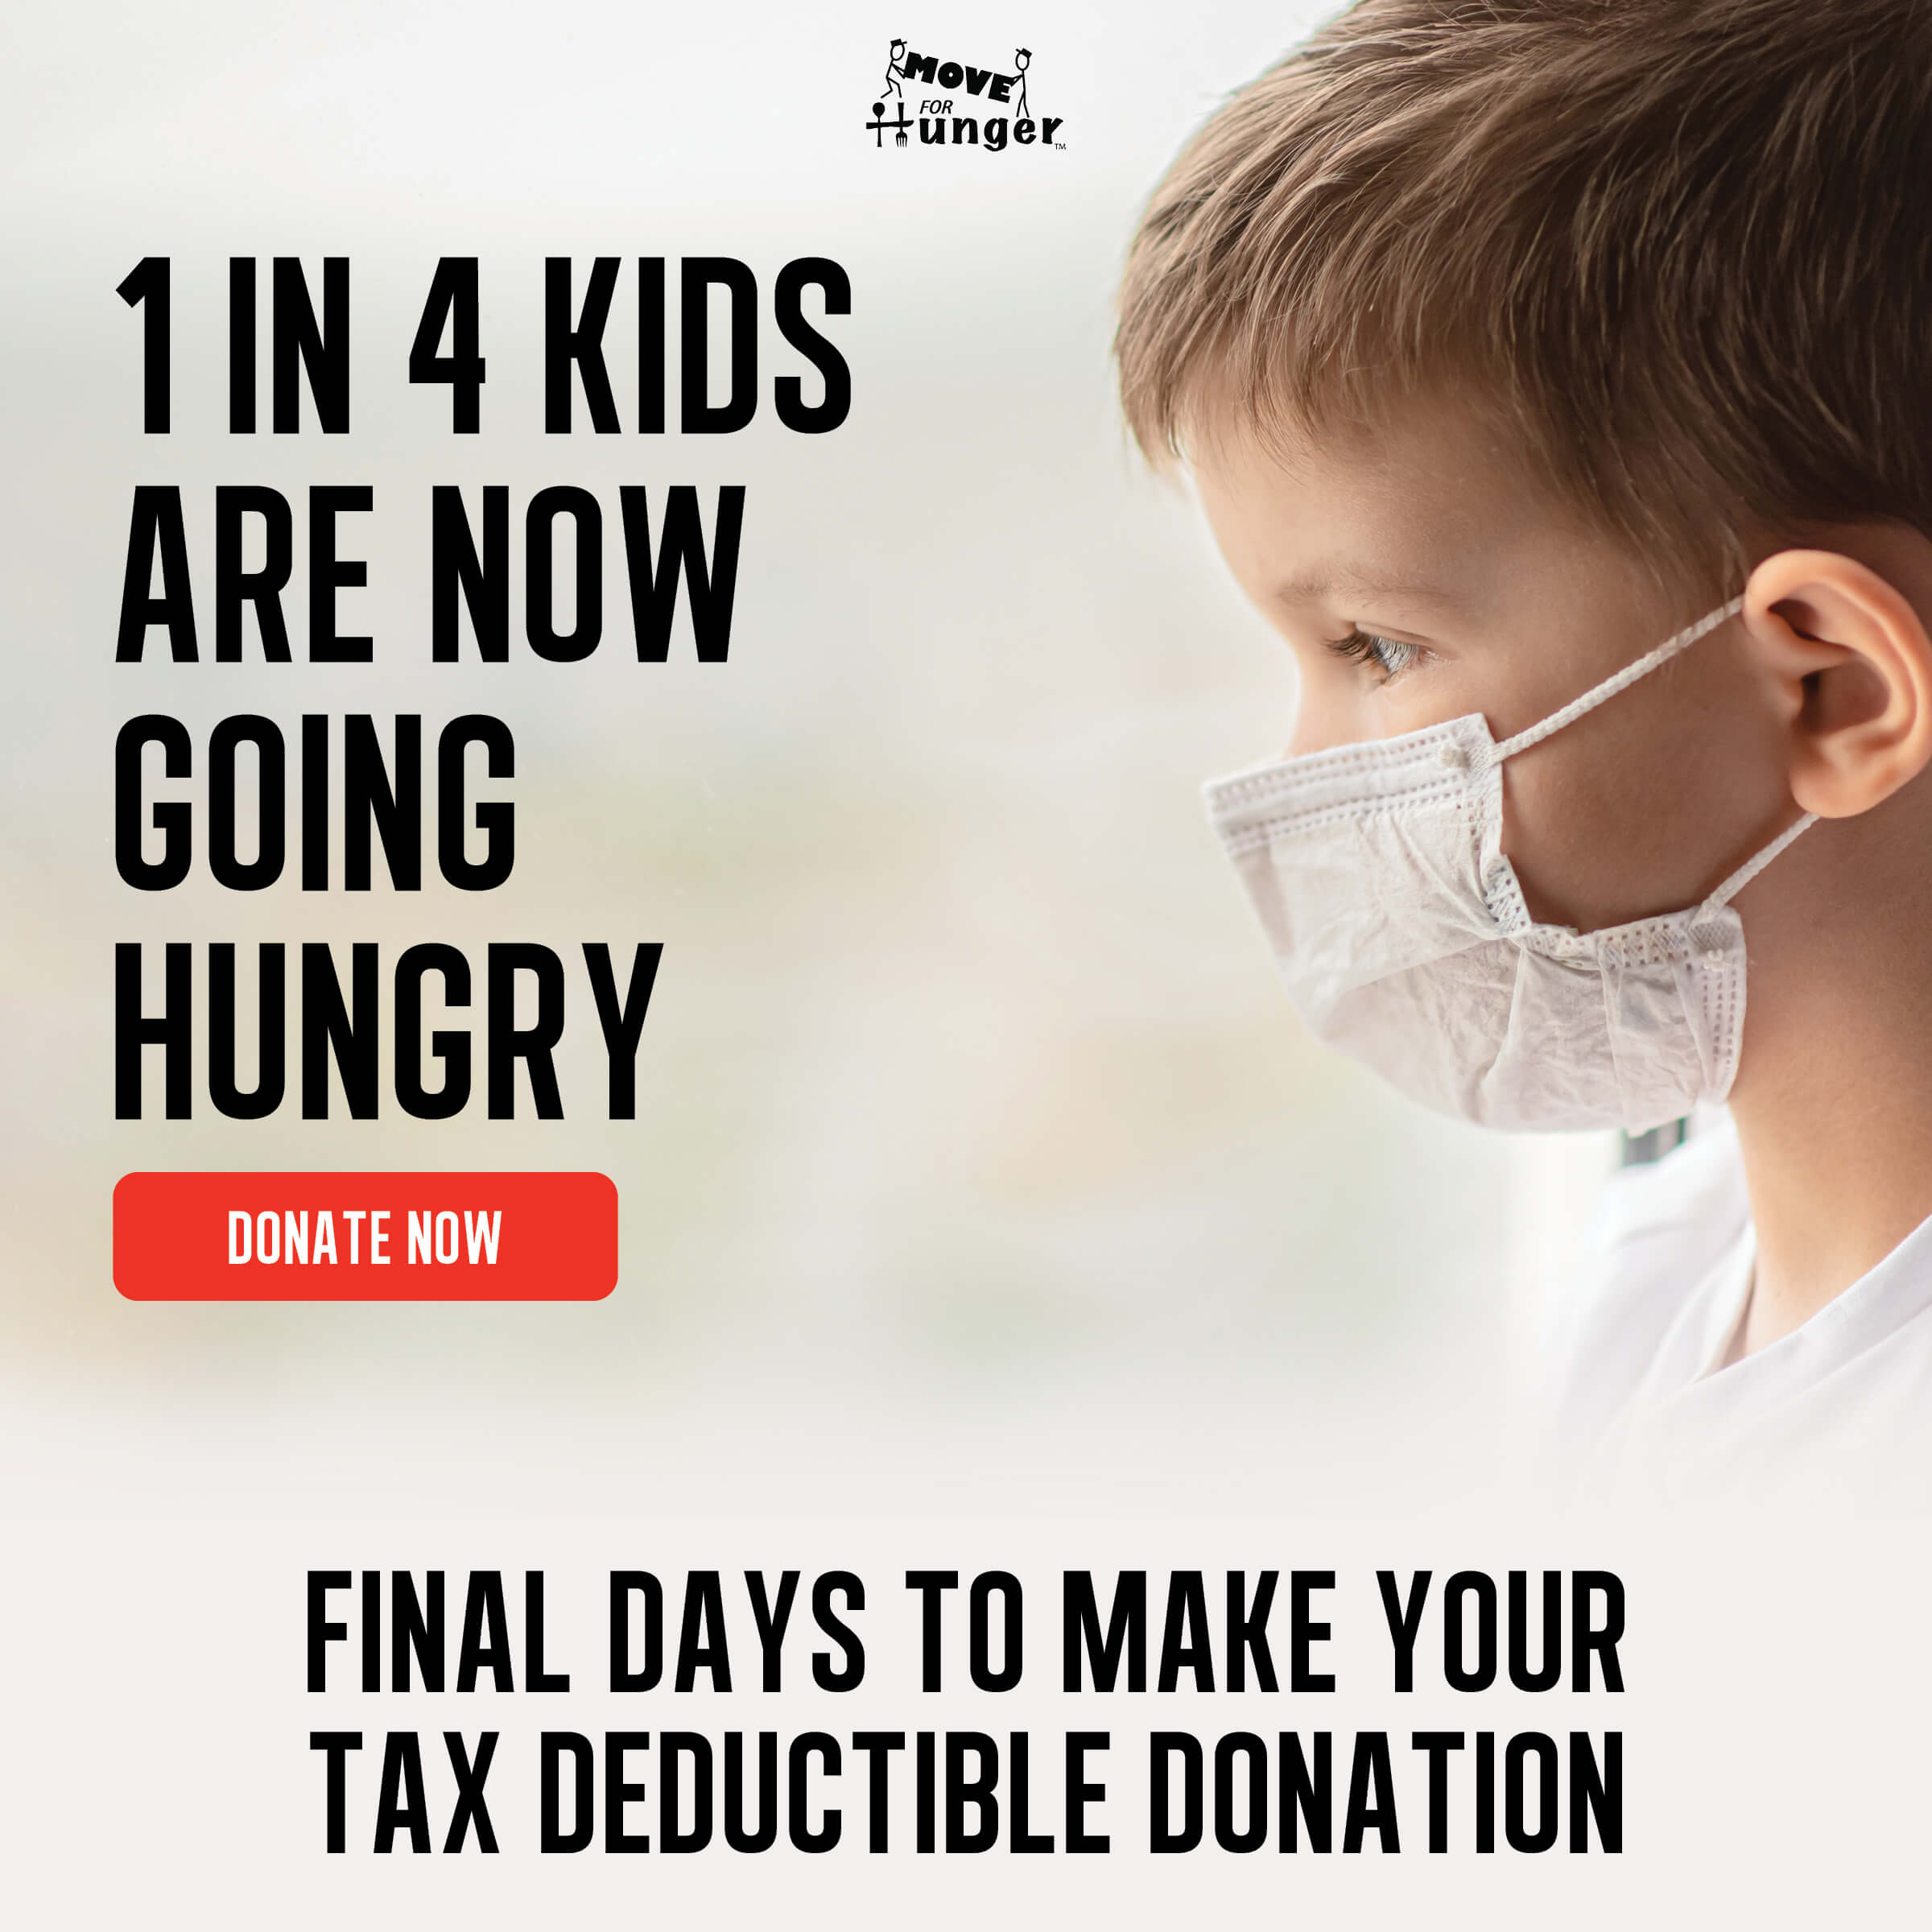 1 in 4 Kids are now going hungry